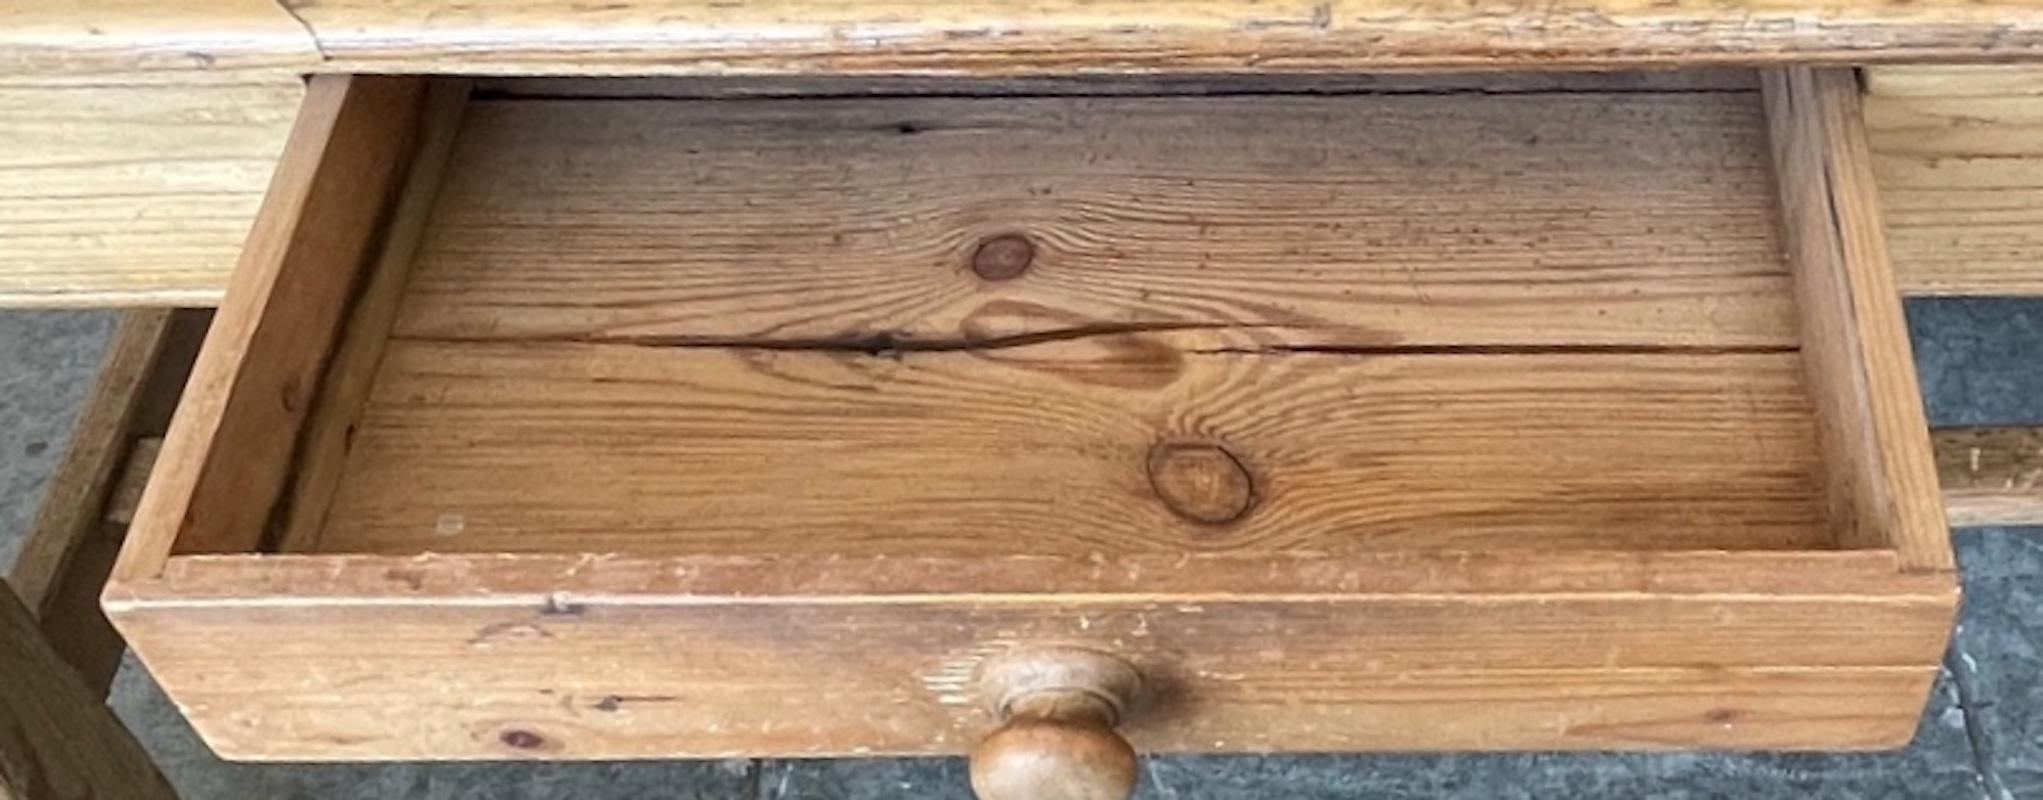 Irish 19th Century Pine Breakfast Table or Desk with One Center Drawer For Sale 10